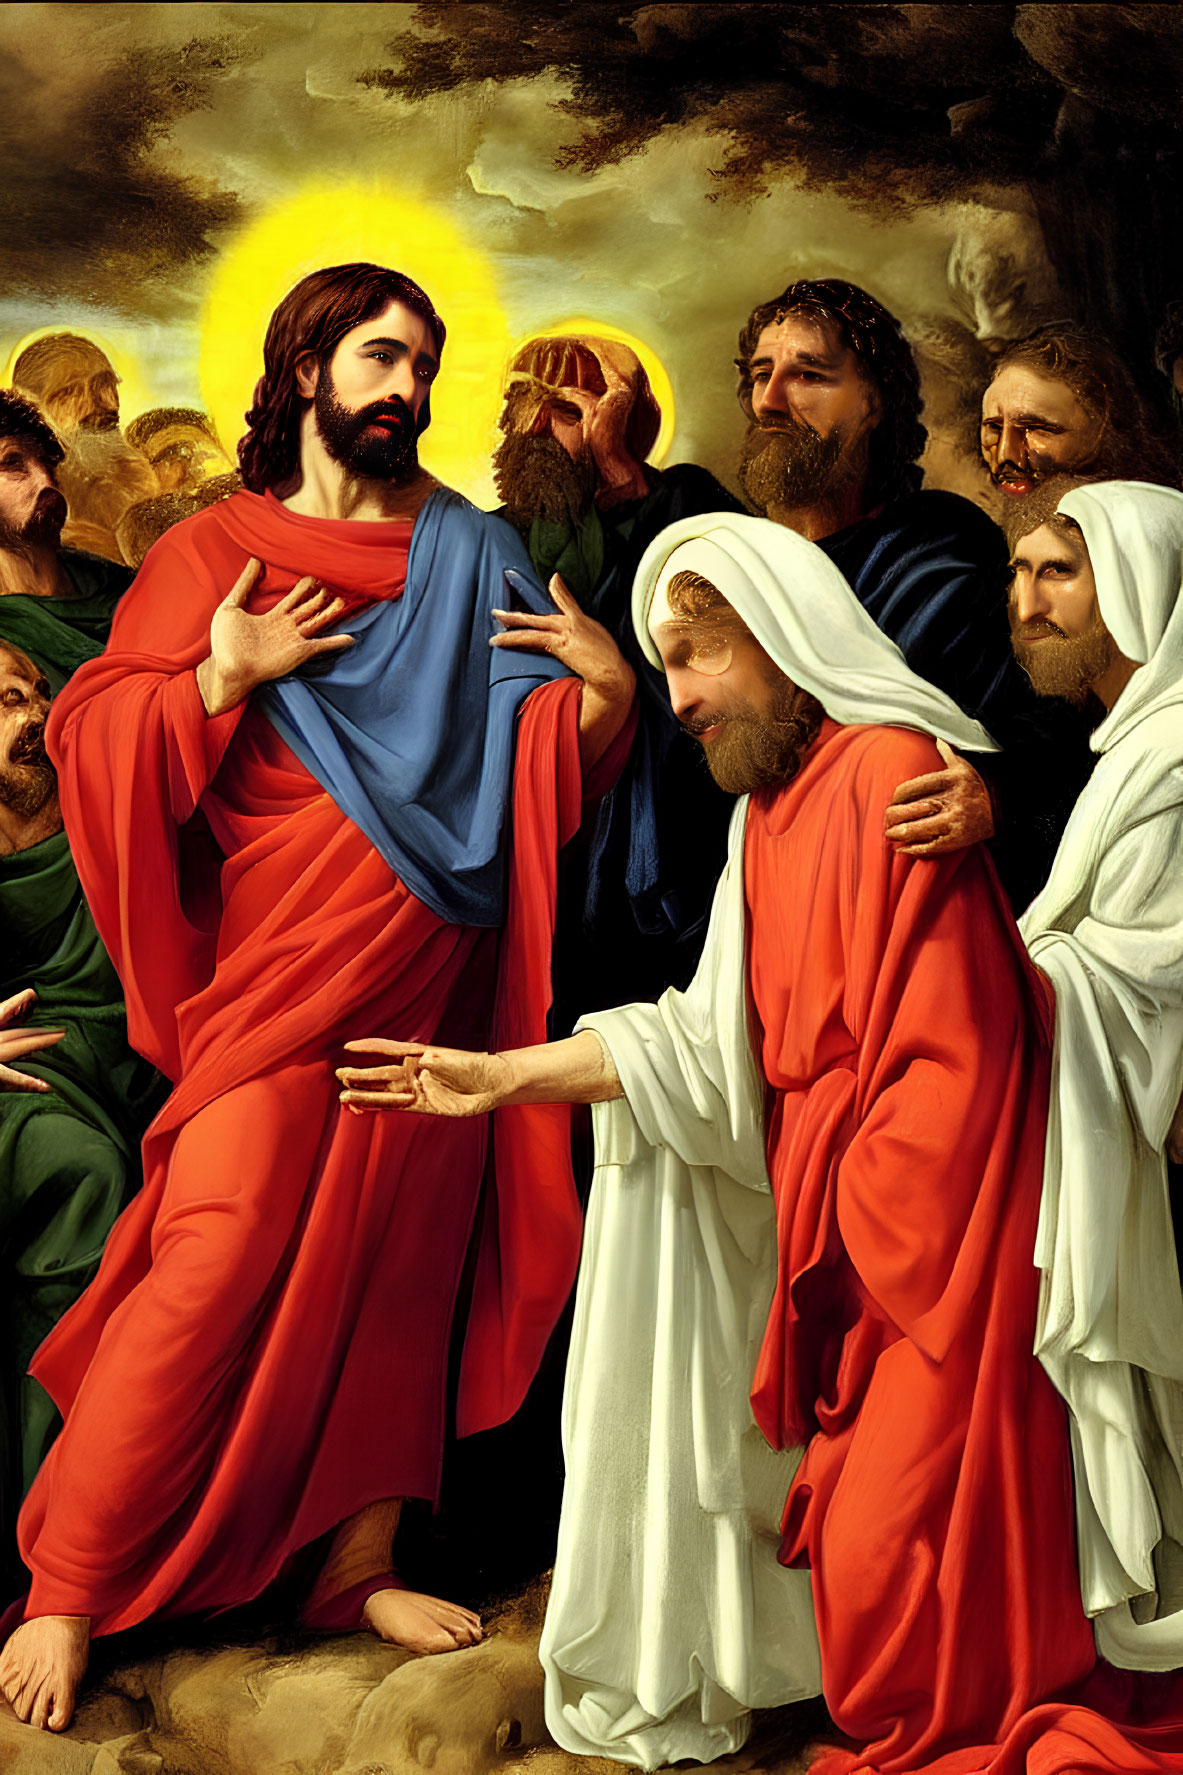 Classic Painting of Haloed Figure in Red and Blue Robes with Onlookers